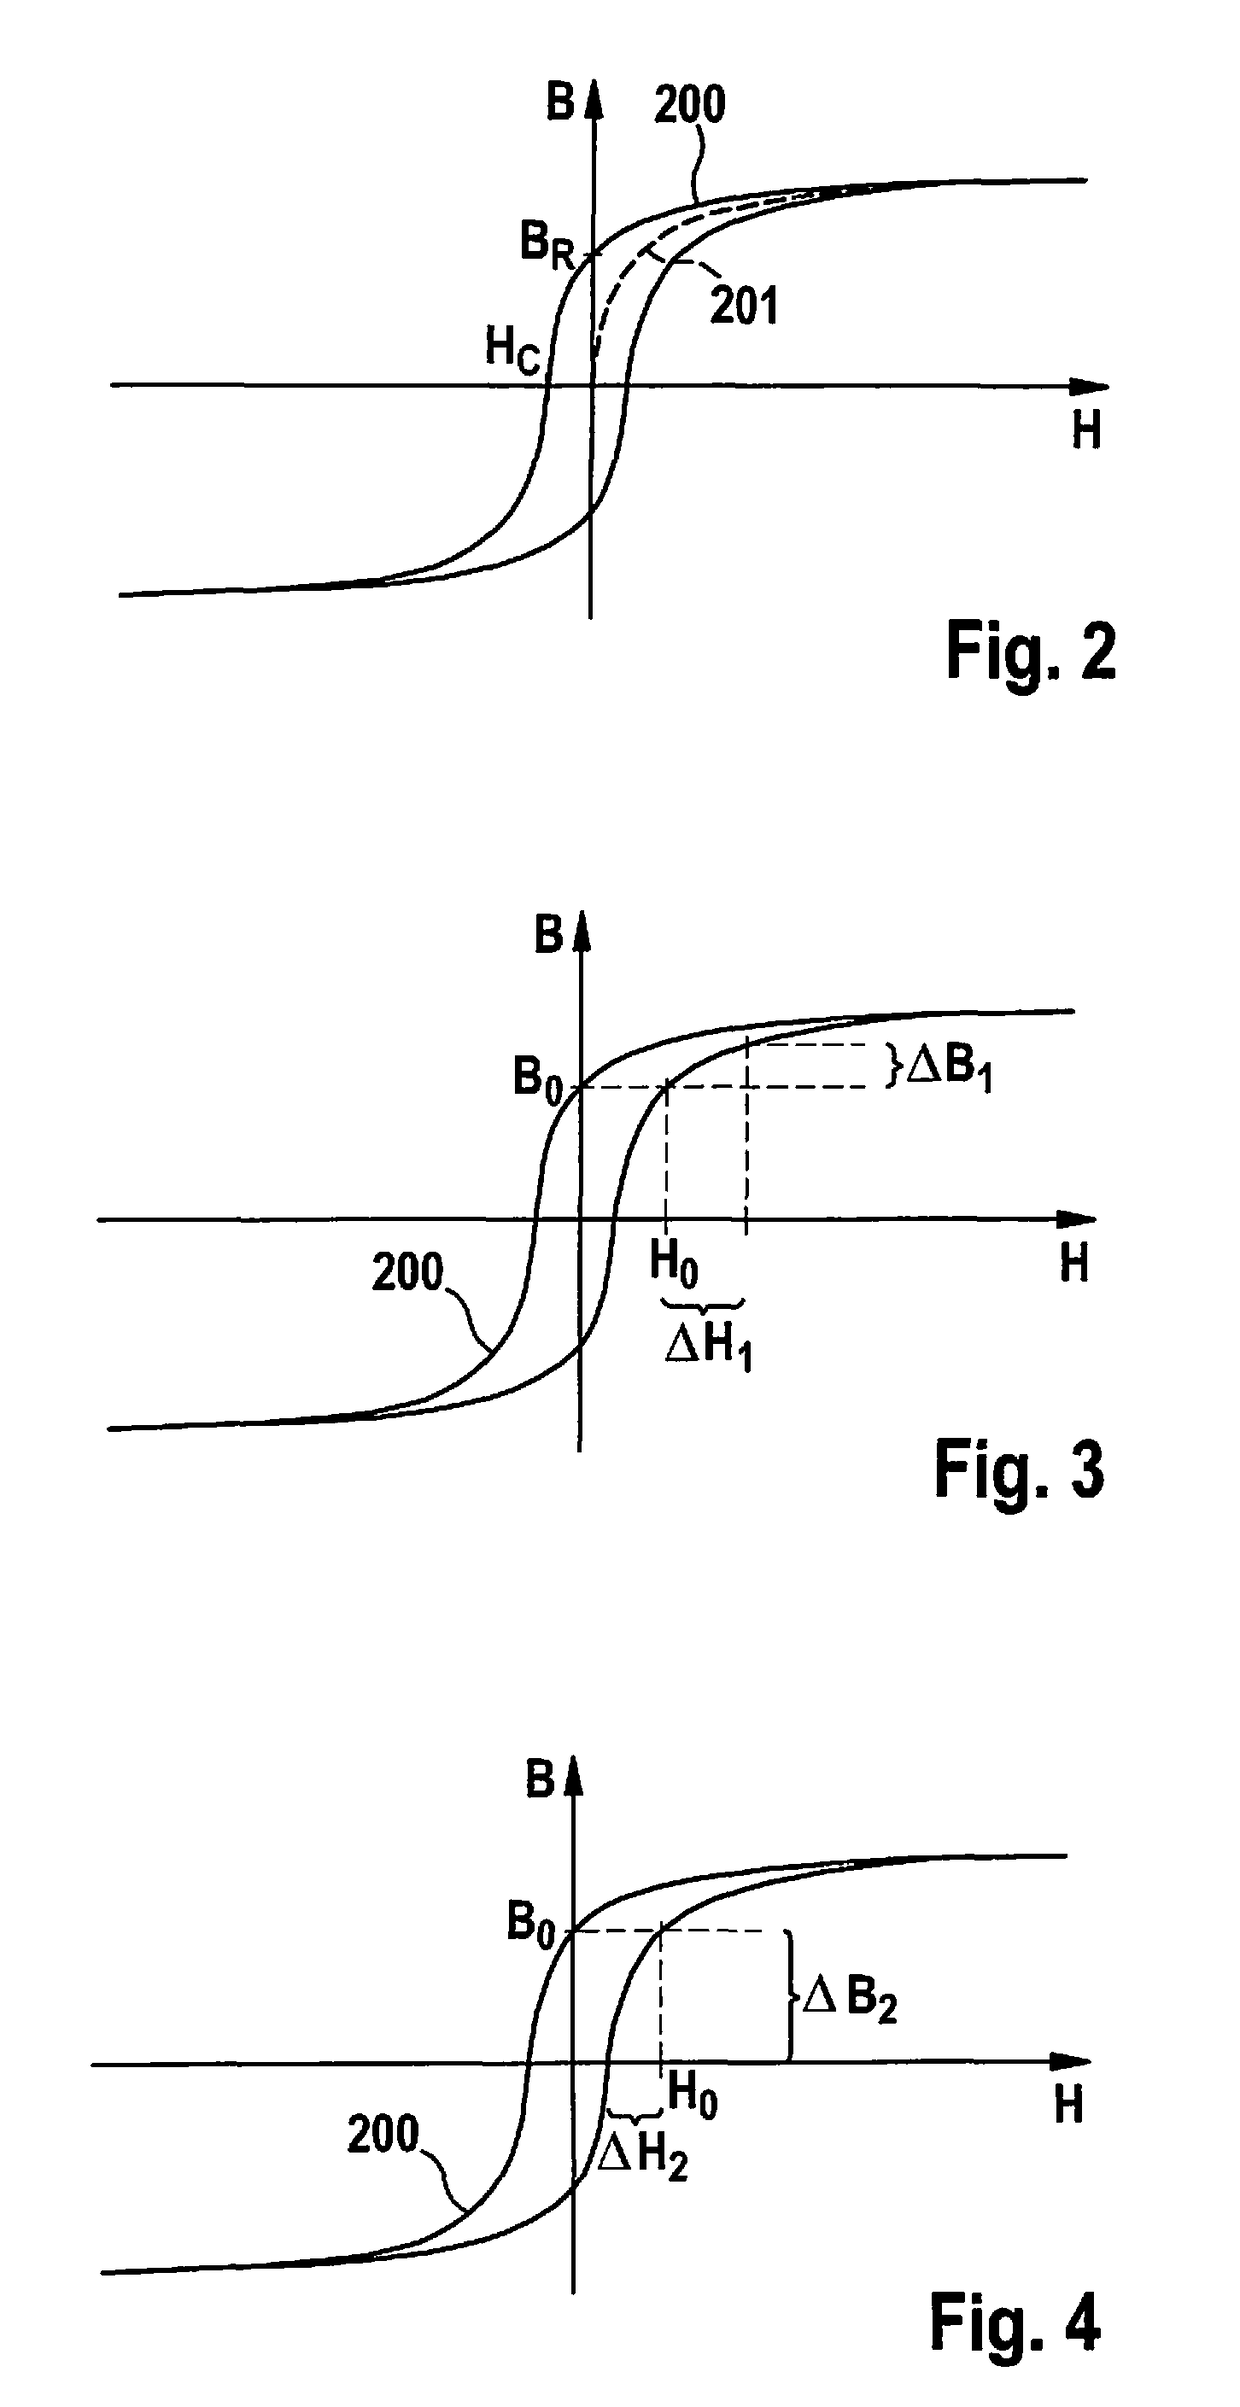 Method for ascertaining a position of a rotor of an electrical machine